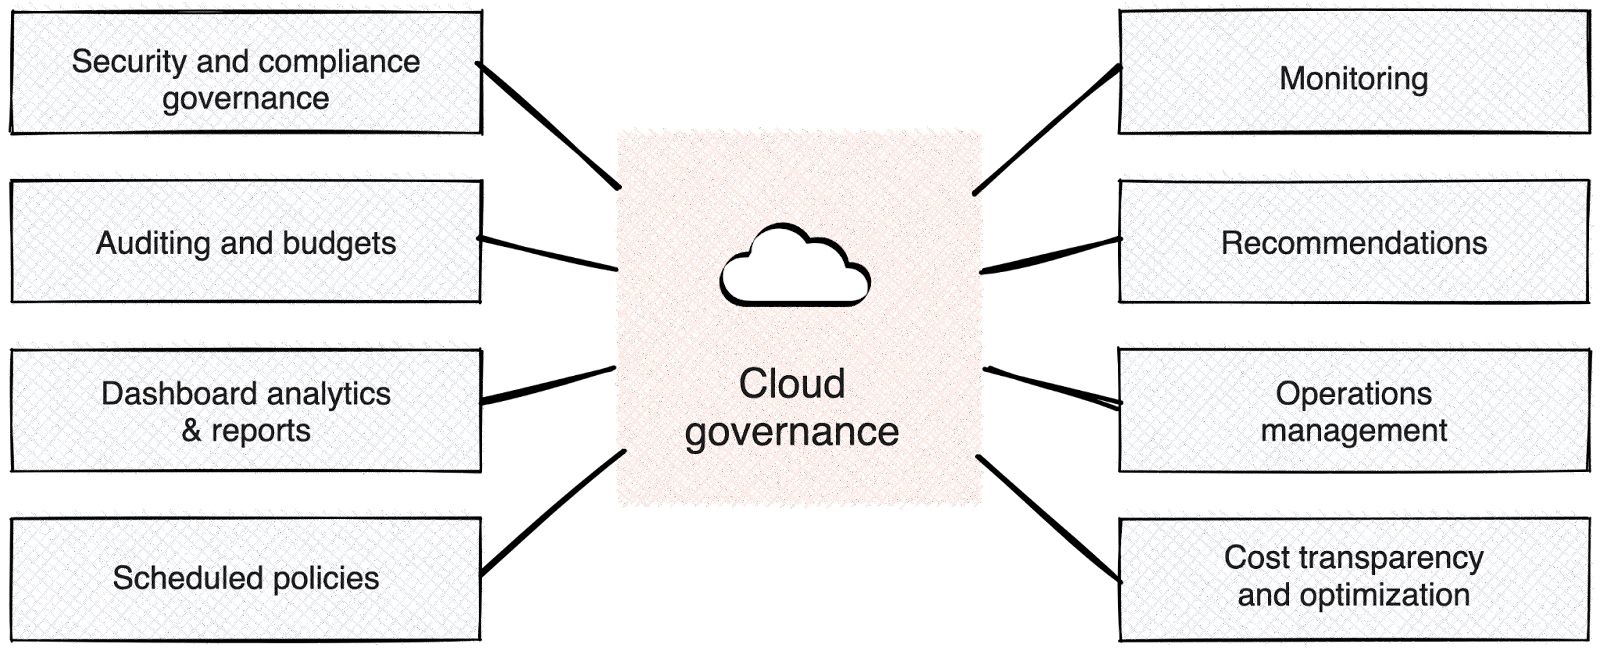 Diagram of the various aspects involved with maintainin governance in the cloud